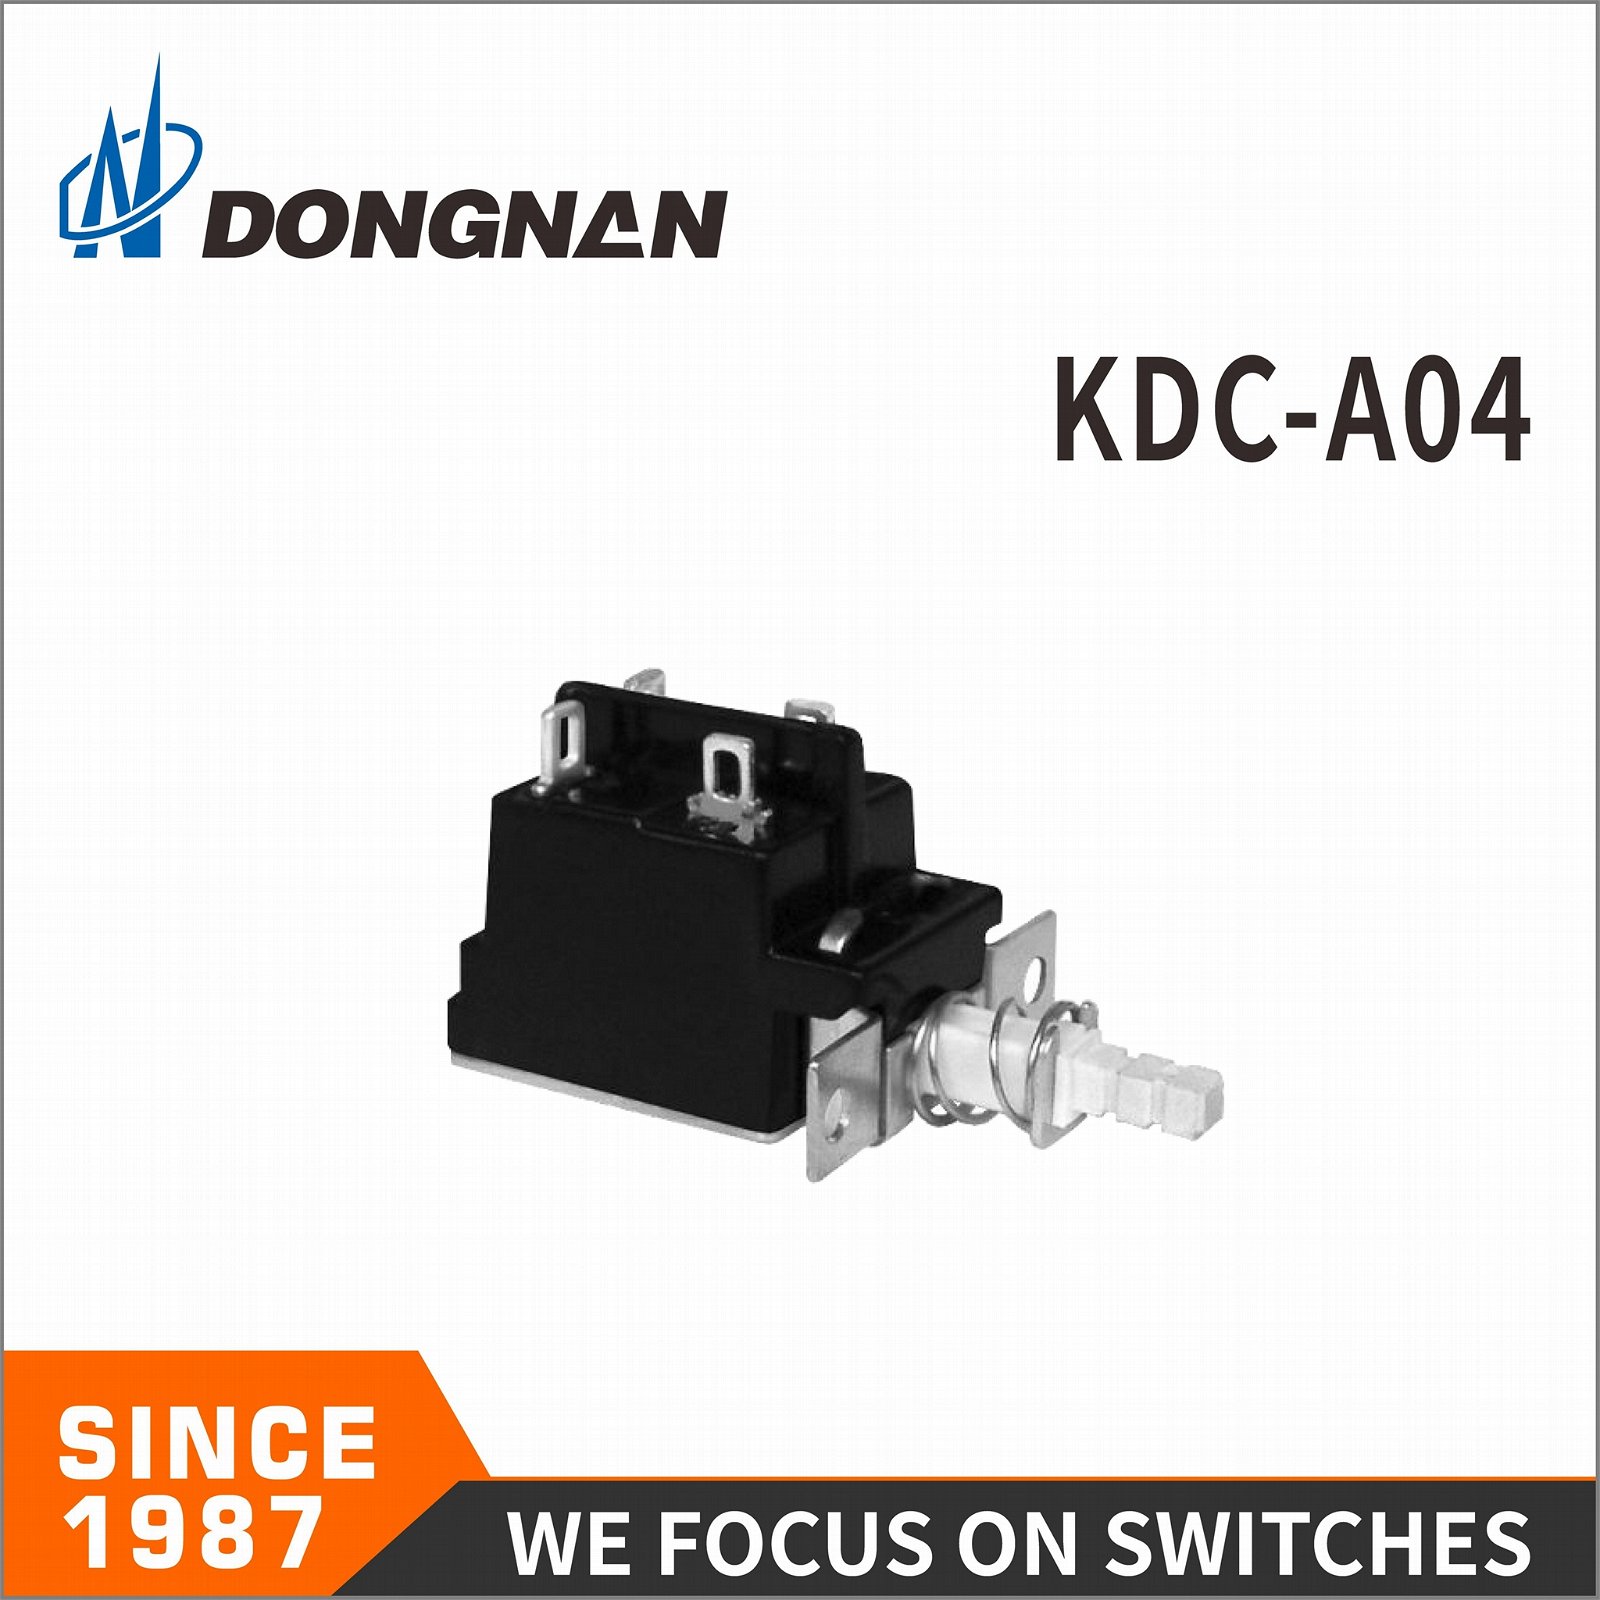 Dongnan Kdc-A04 Power Switch for Computer Long Life